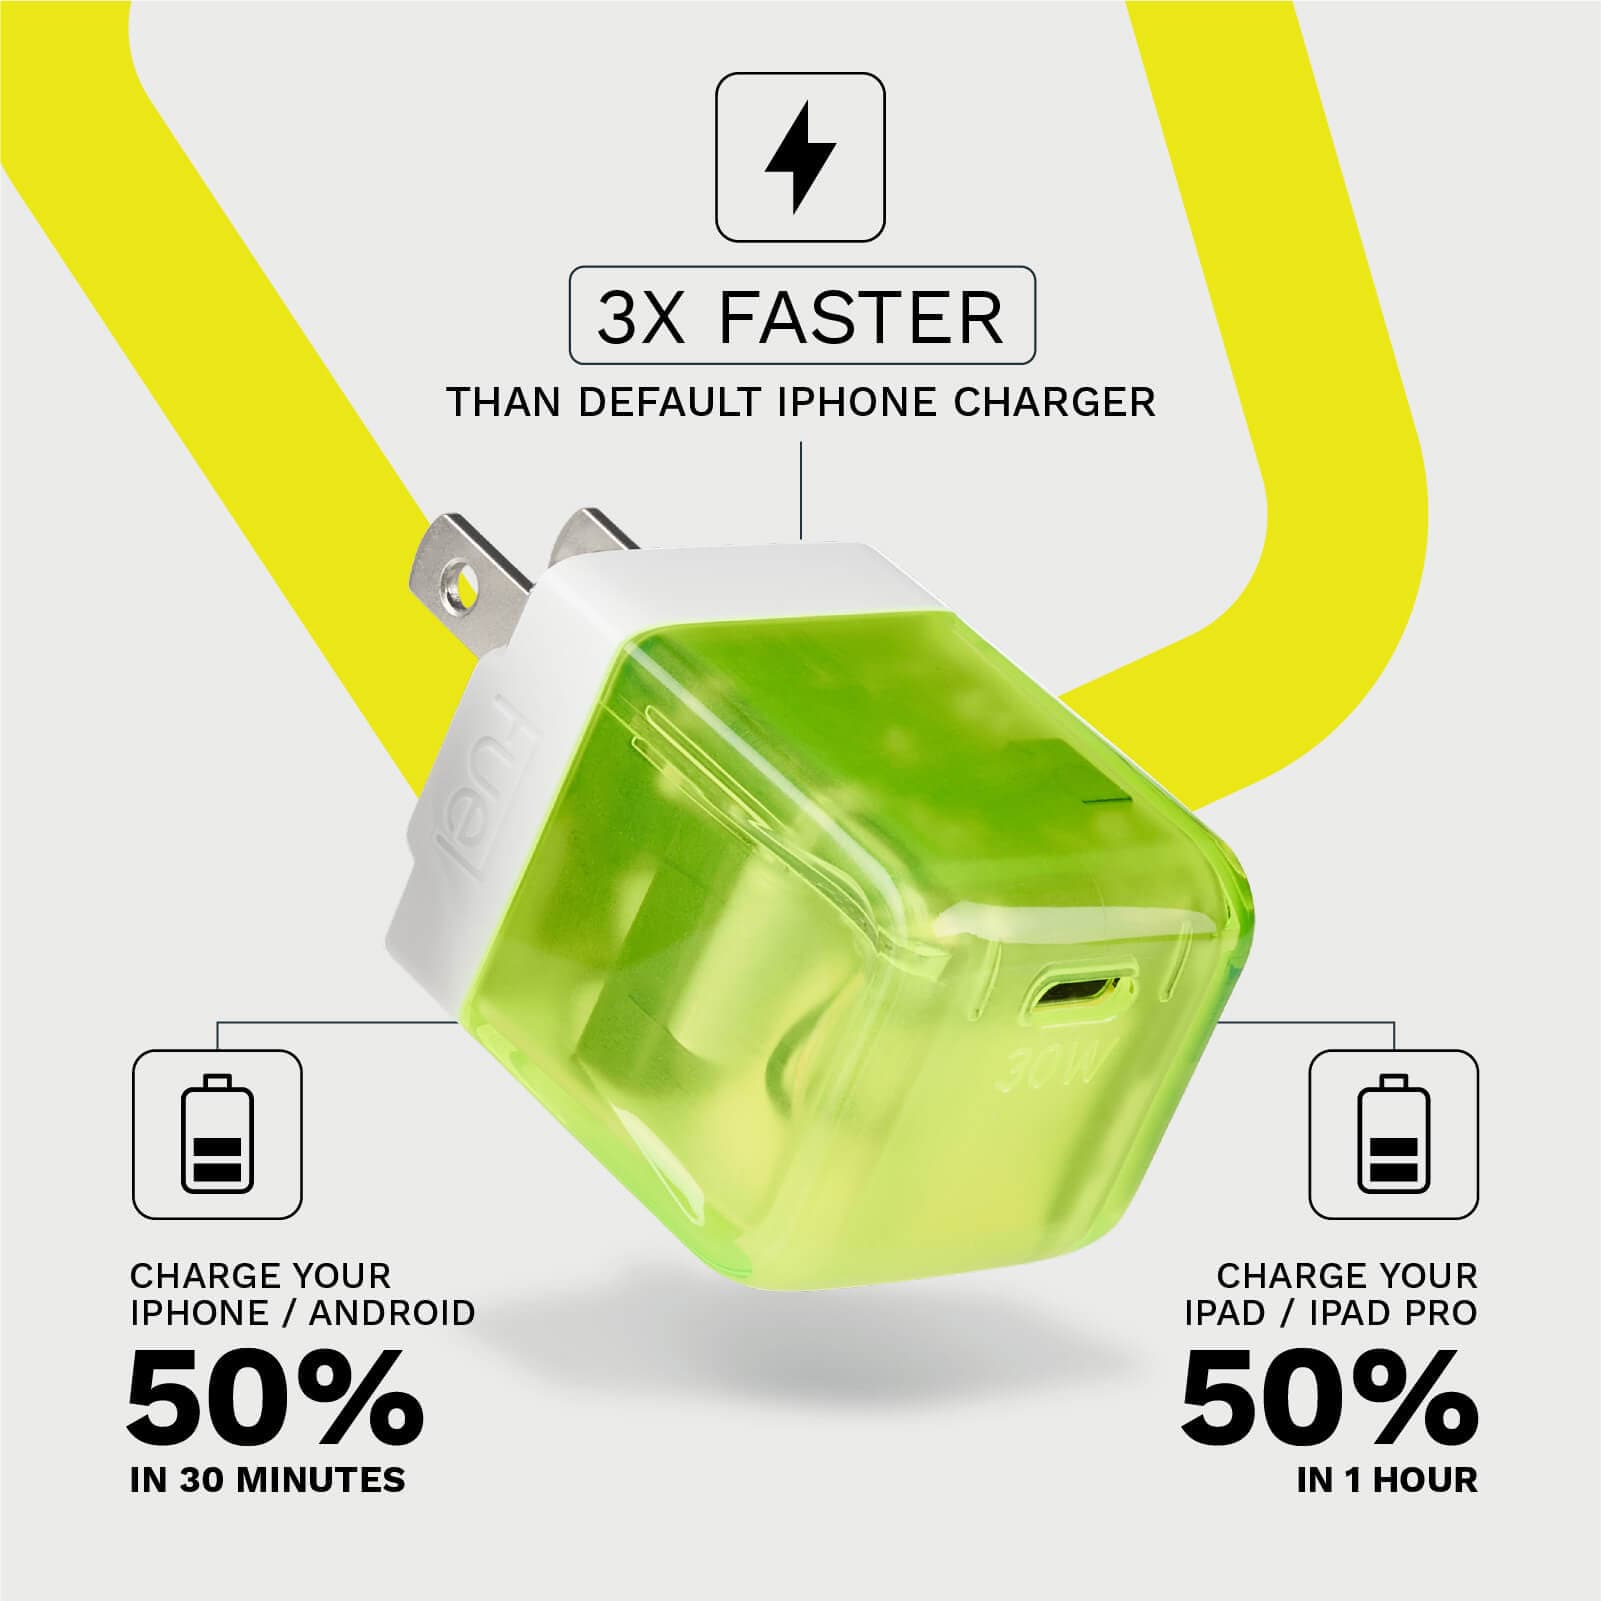 3X FASTER THAN DEFAULT IPHONE CHARGER. CHARGE YOUR IPHONE/ANDROID 50% IN 30 MINUTES OR CHARGE YOUR IPAD 50% IN 1 HOUR color::Vivid Green